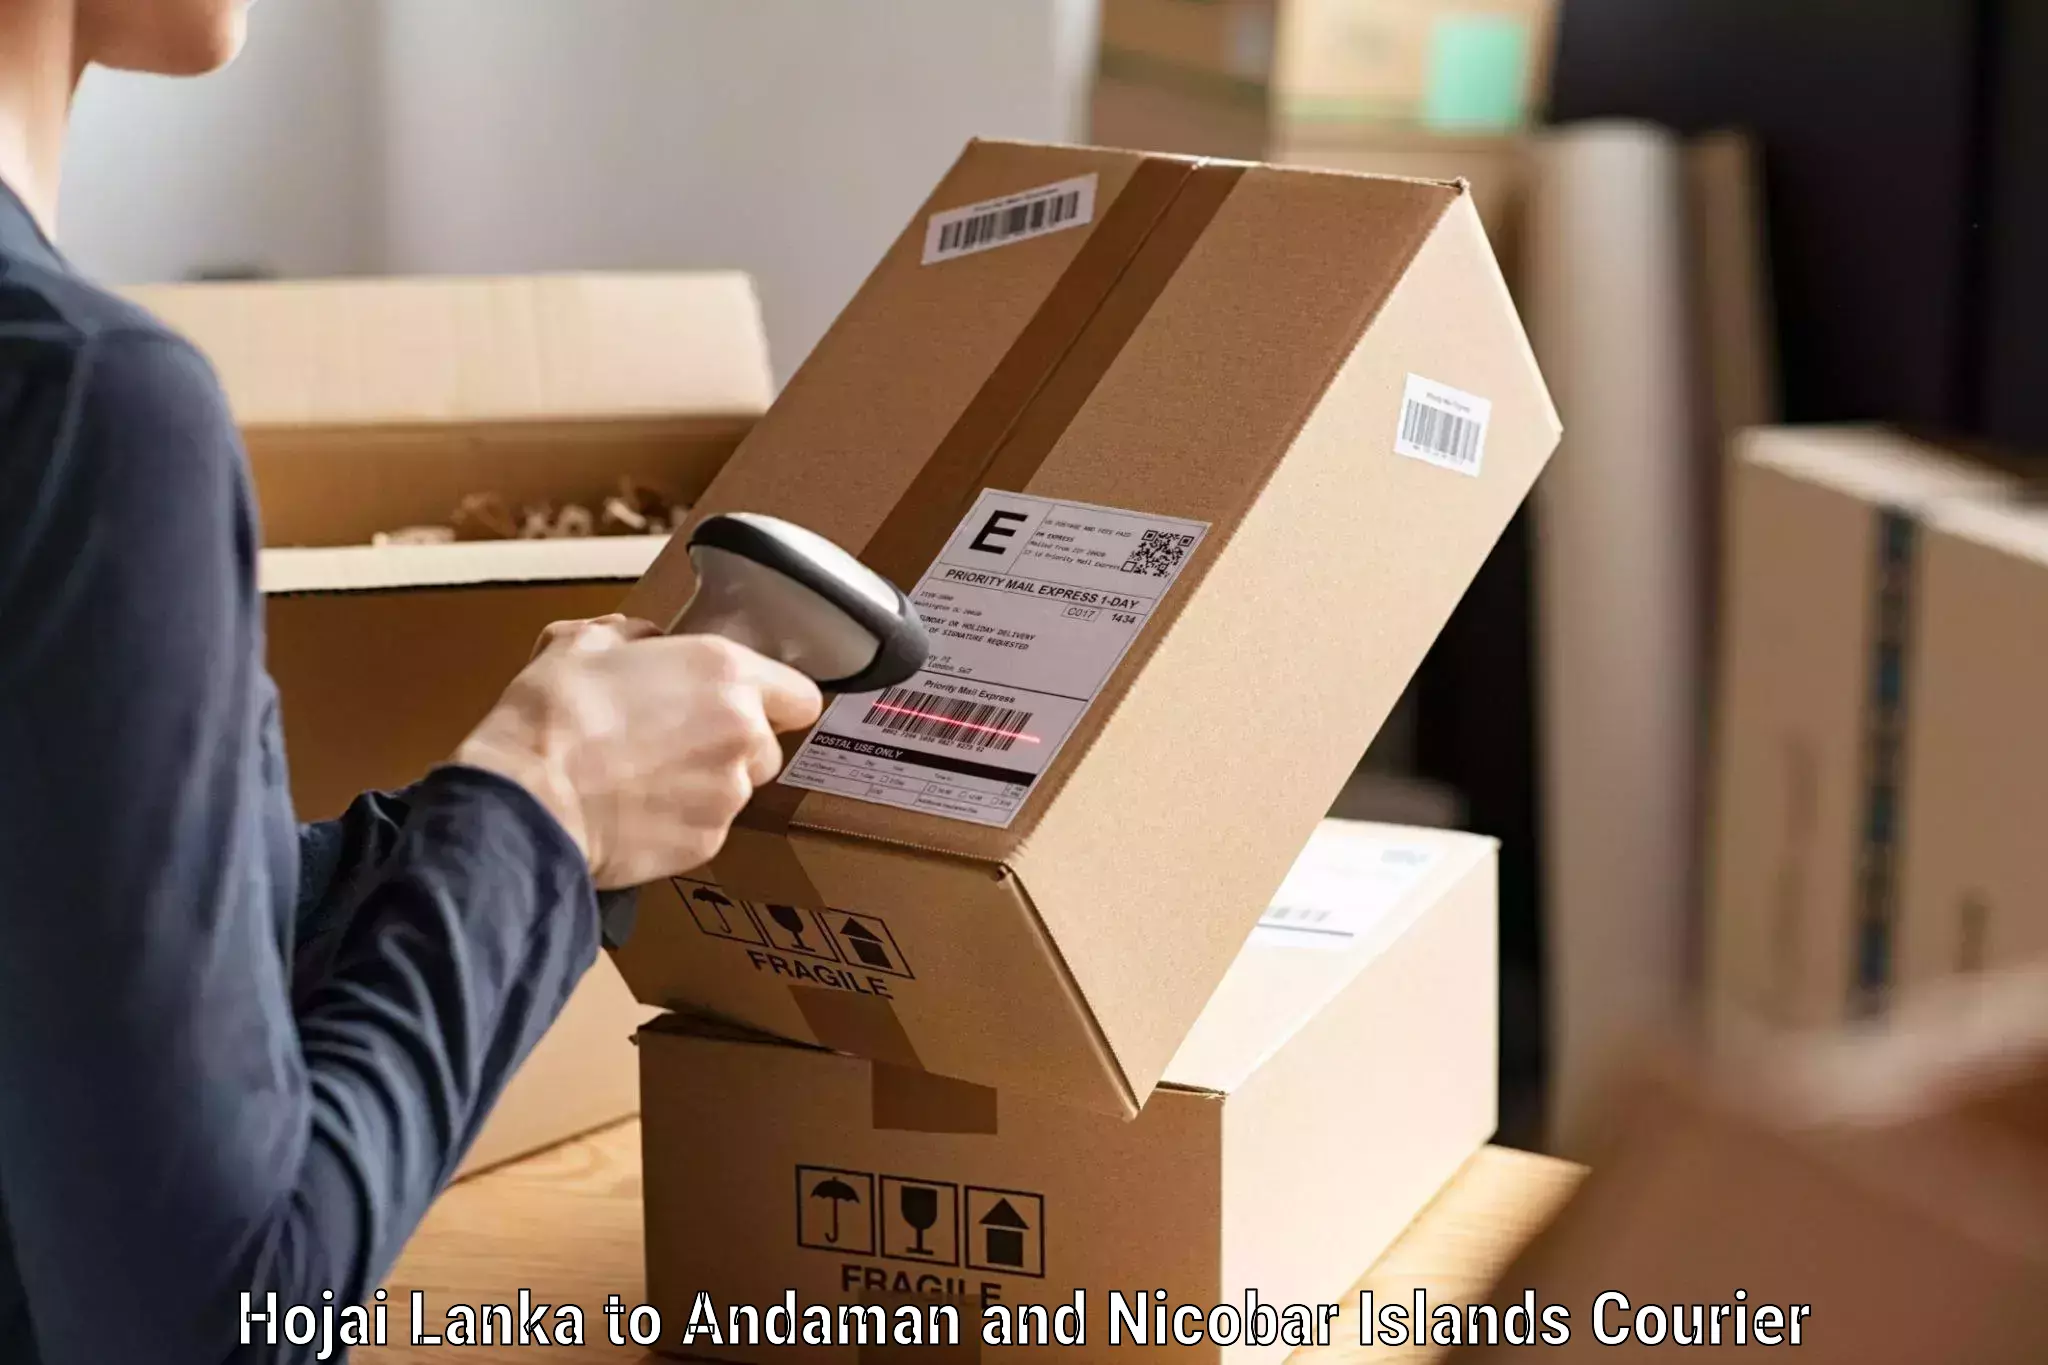 Professional parcel services Hojai Lanka to North And Middle Andaman